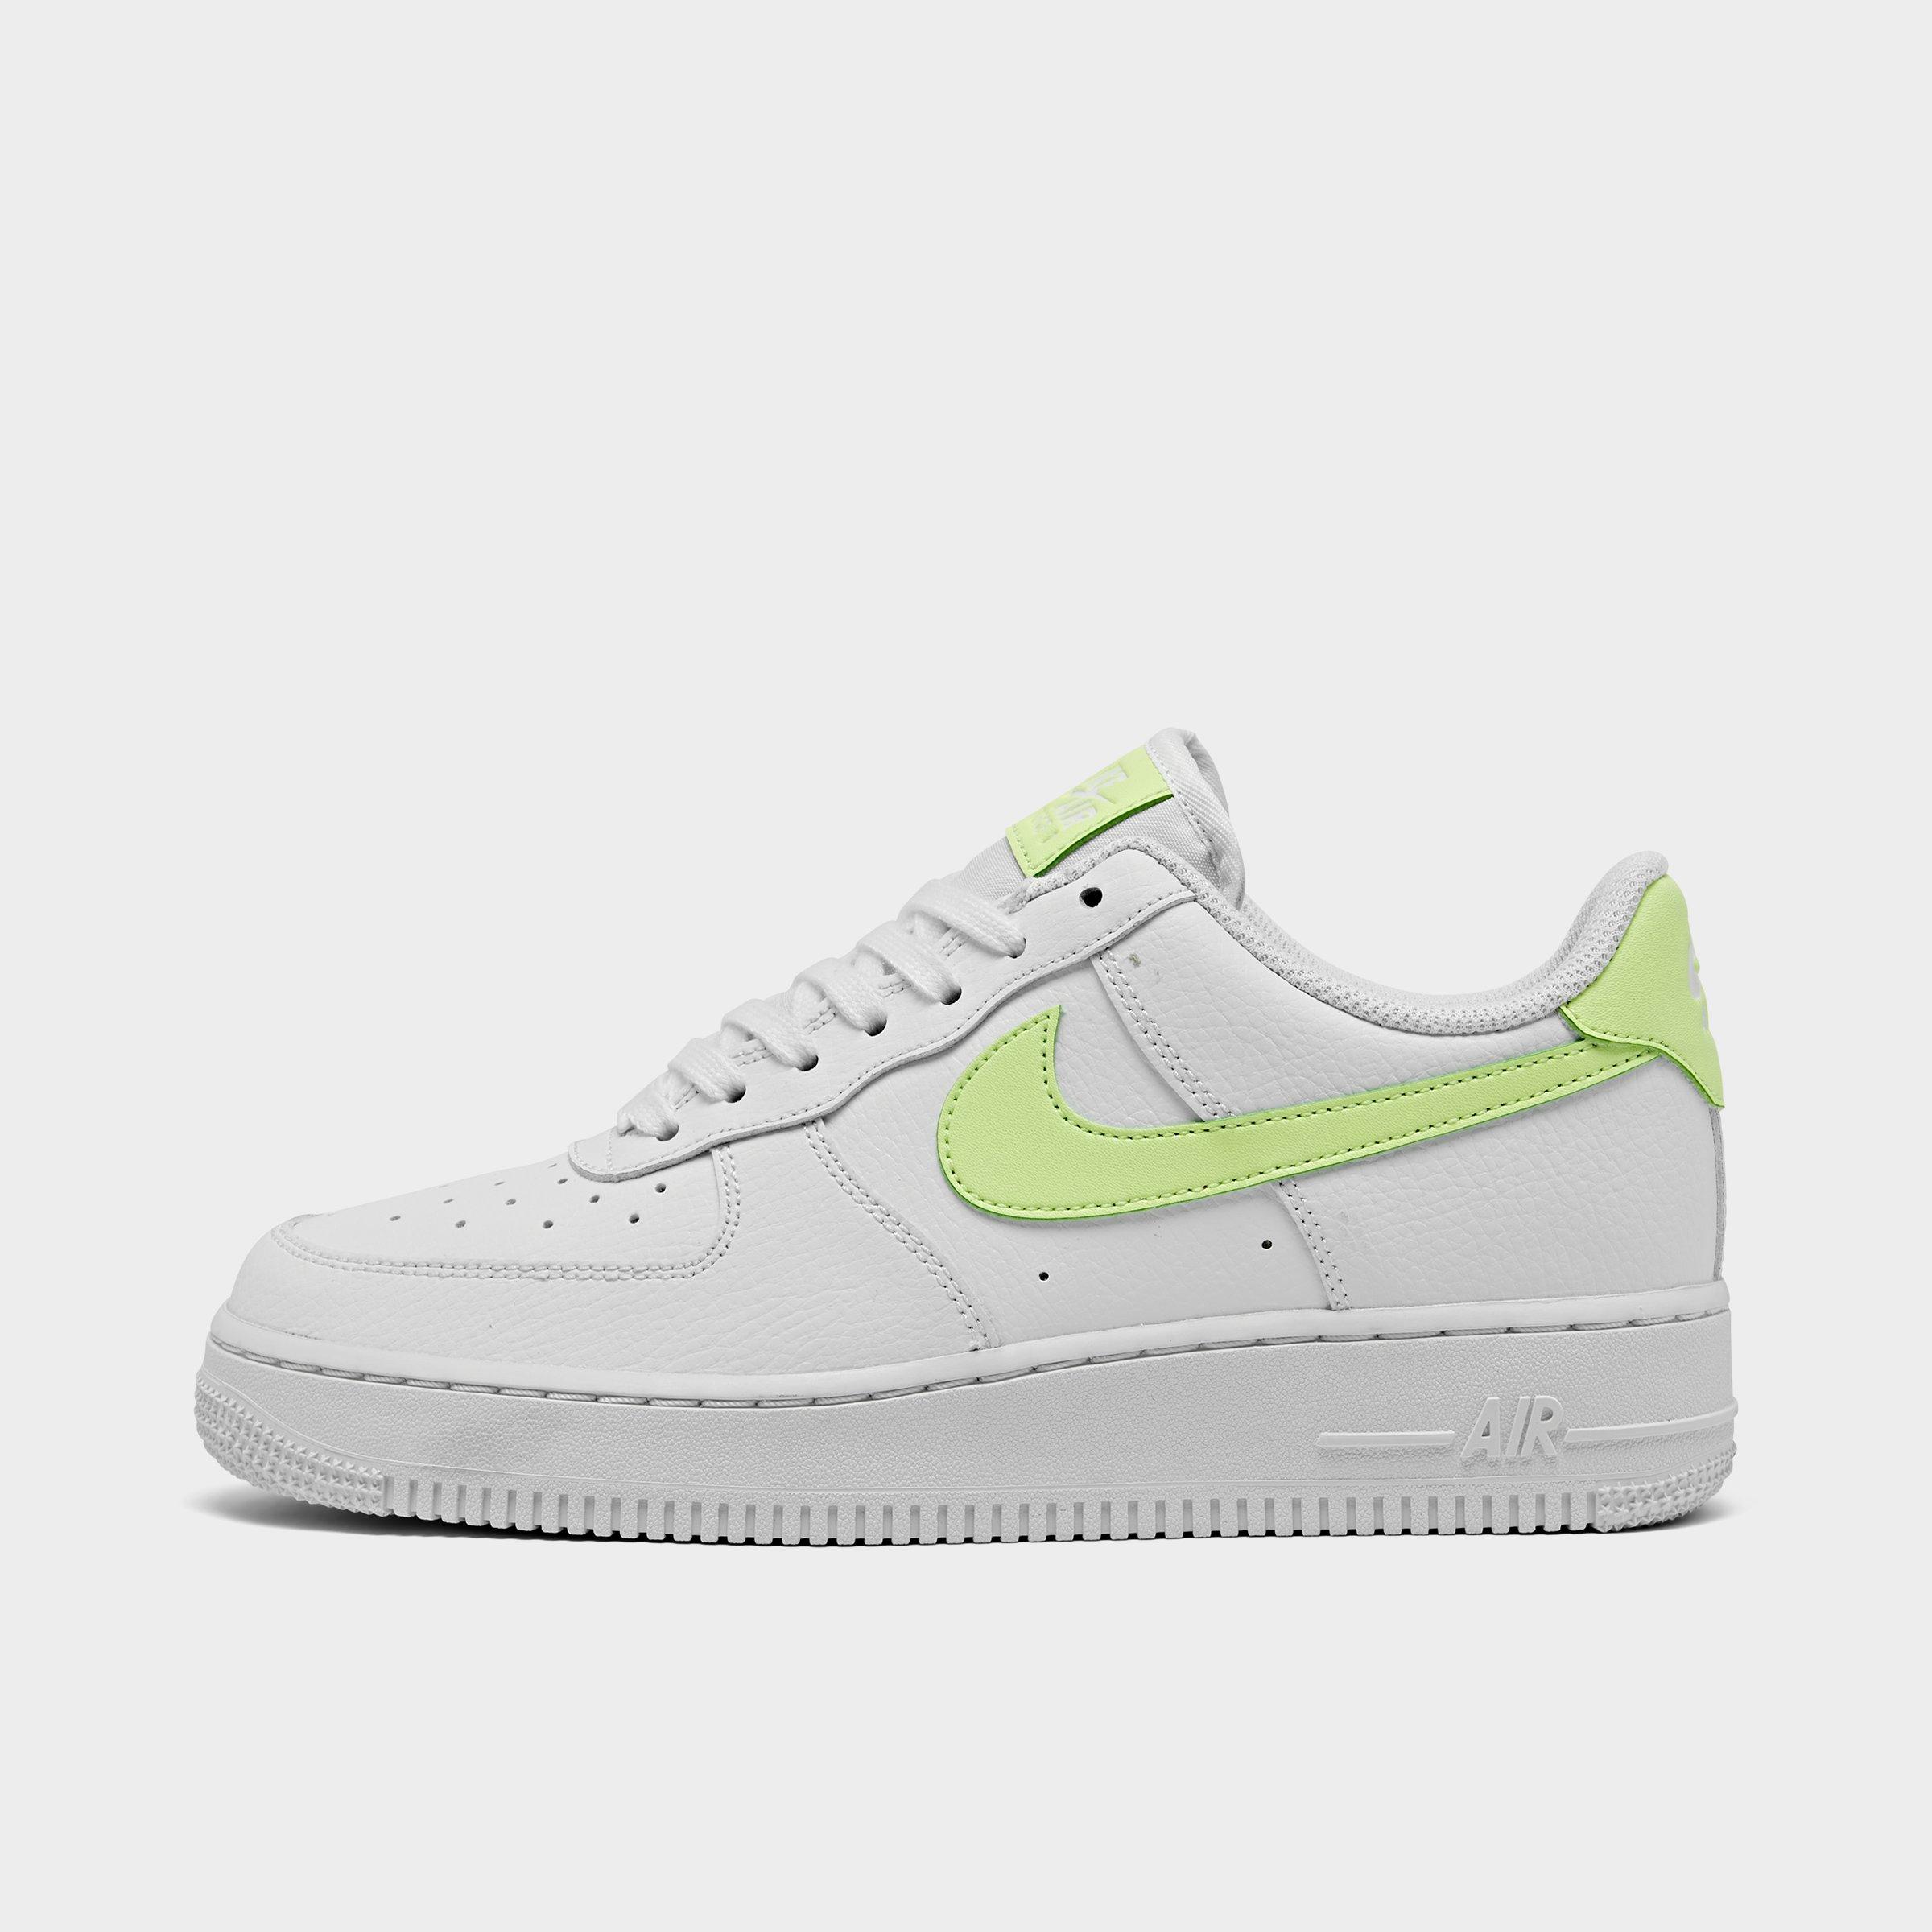 air force 1 shoes cost